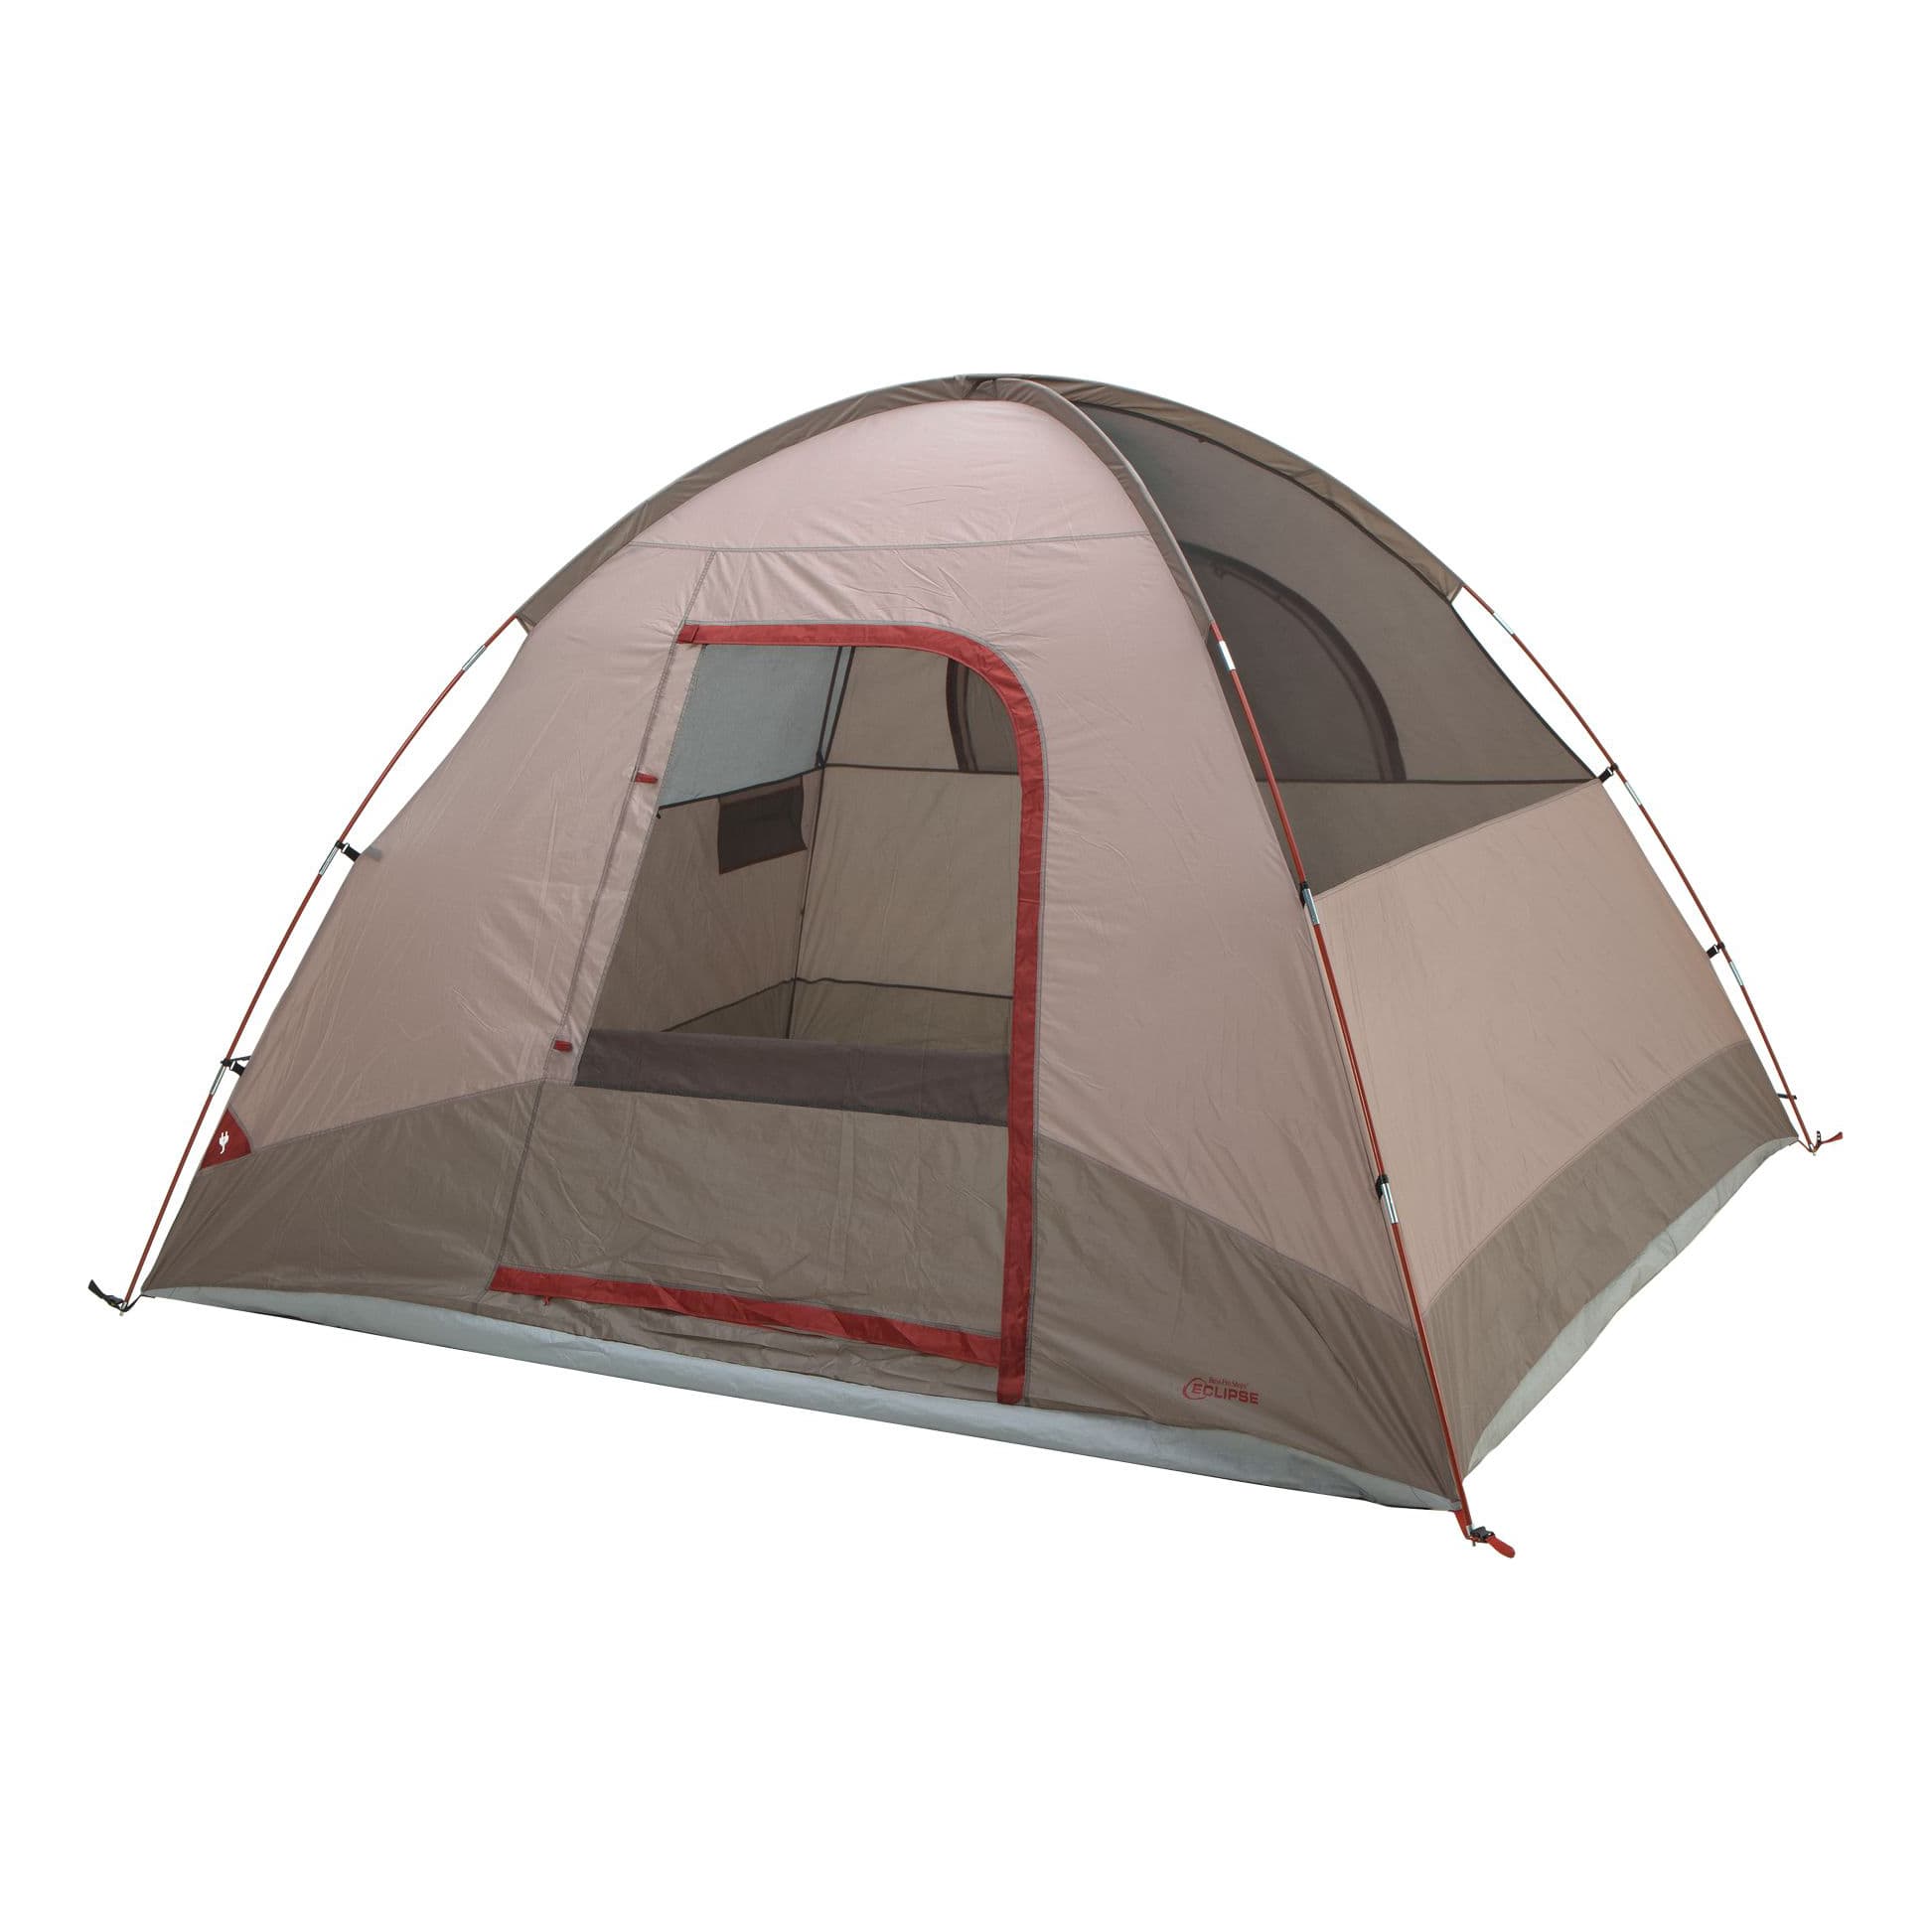 Bass Pro Shops® Eclipse™ Voyager 6-Person Tent with Screen Porch - Without Fly View